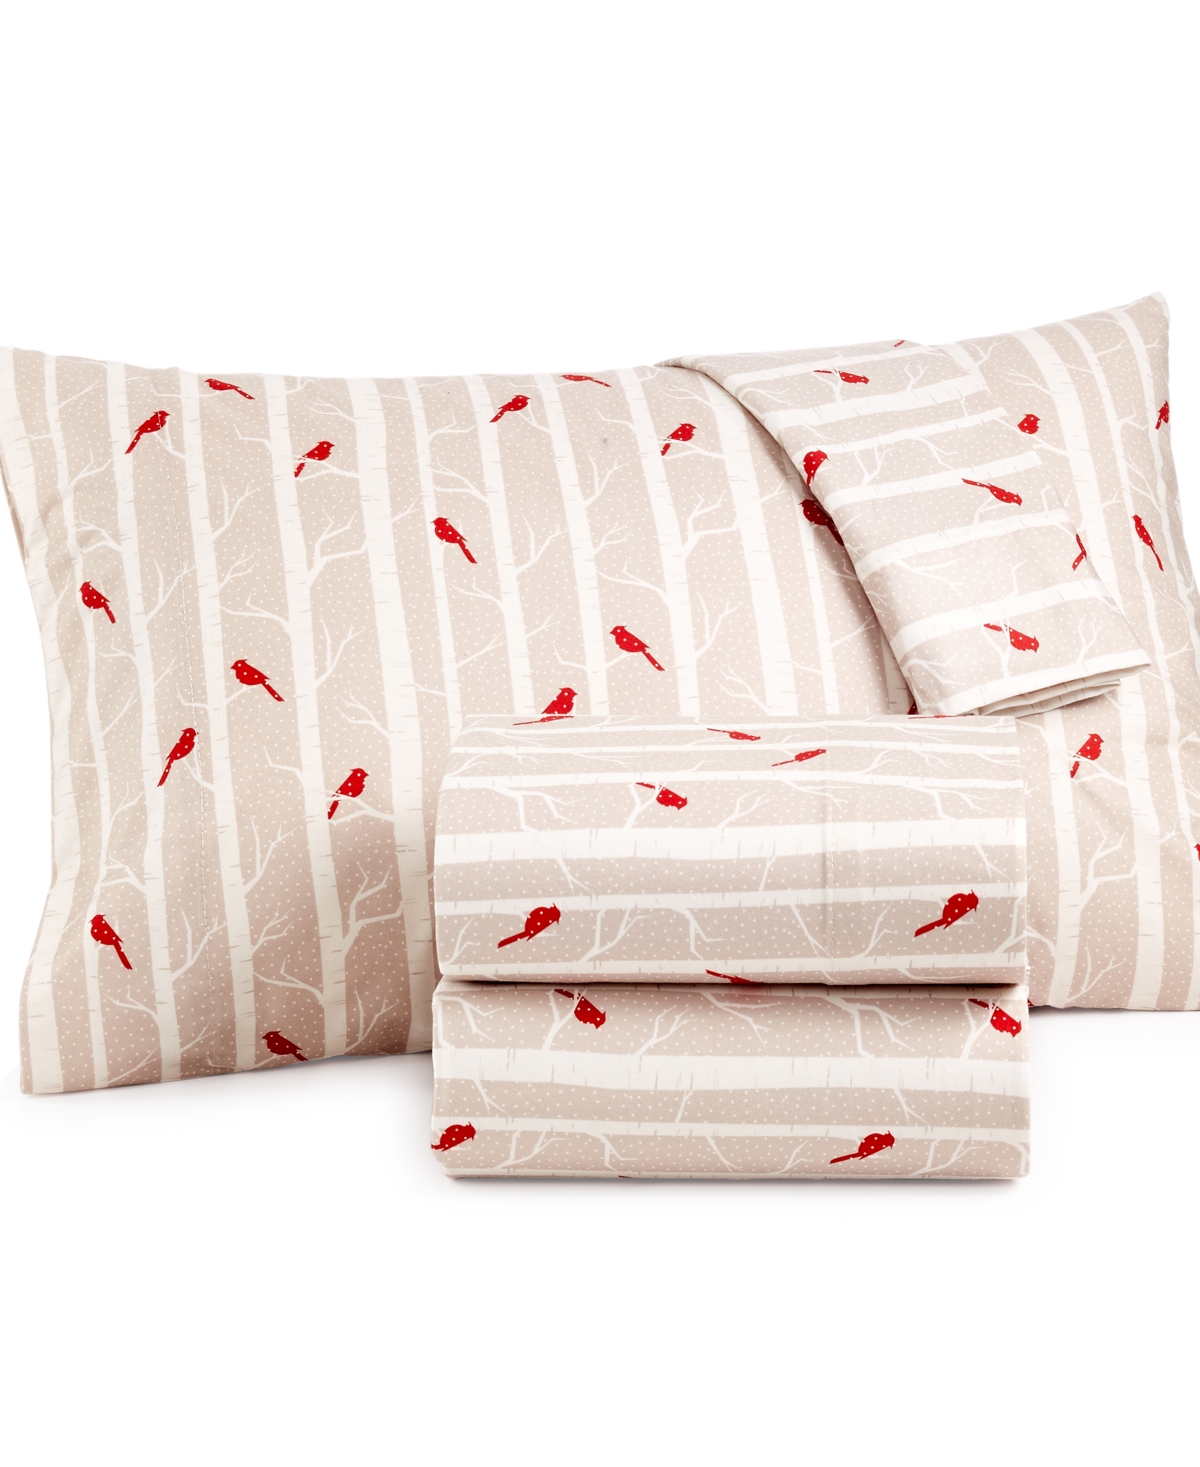 Shavel Micro Flannel Printed California King 4-pc Sheet Set In Cardinals